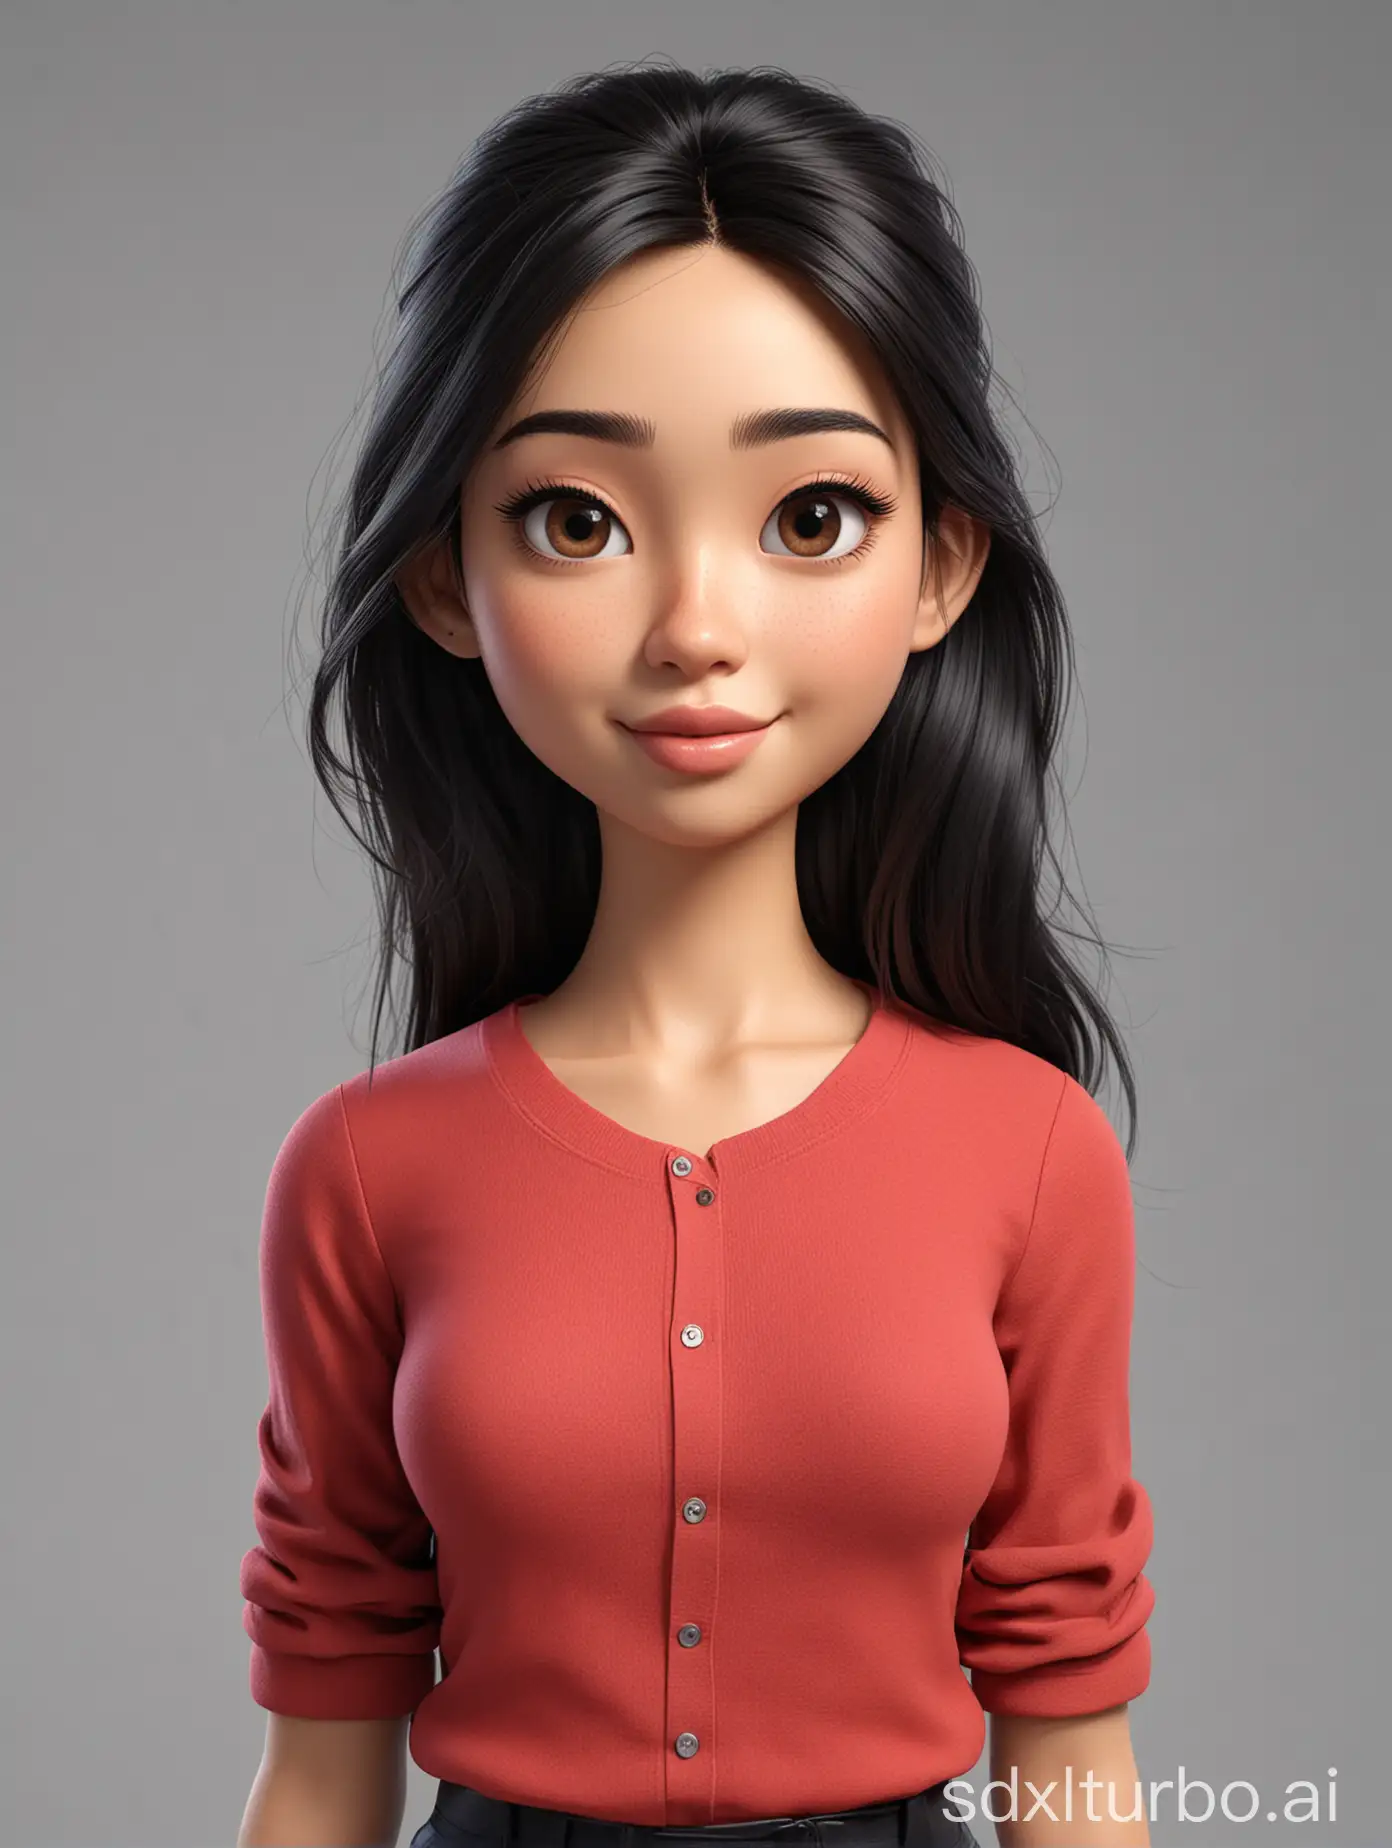 Create a 3D cartoon-style half body with a large head. A 25-year-old Indonesian woman. Ideal height, oval face. Attractive, almond-shaped eyes, slightly rounded nose, white clean skin, thin gentle smile. Long black wavy hair, thin ponytail with shaggy layers. Wearing a light red shirt. Clear body position, hands in a clasping pose. White solid background. Use soft photography lighting, hair lighting, top lighting, side lighting. Medium shot, high quality photo, Uhd, 16k